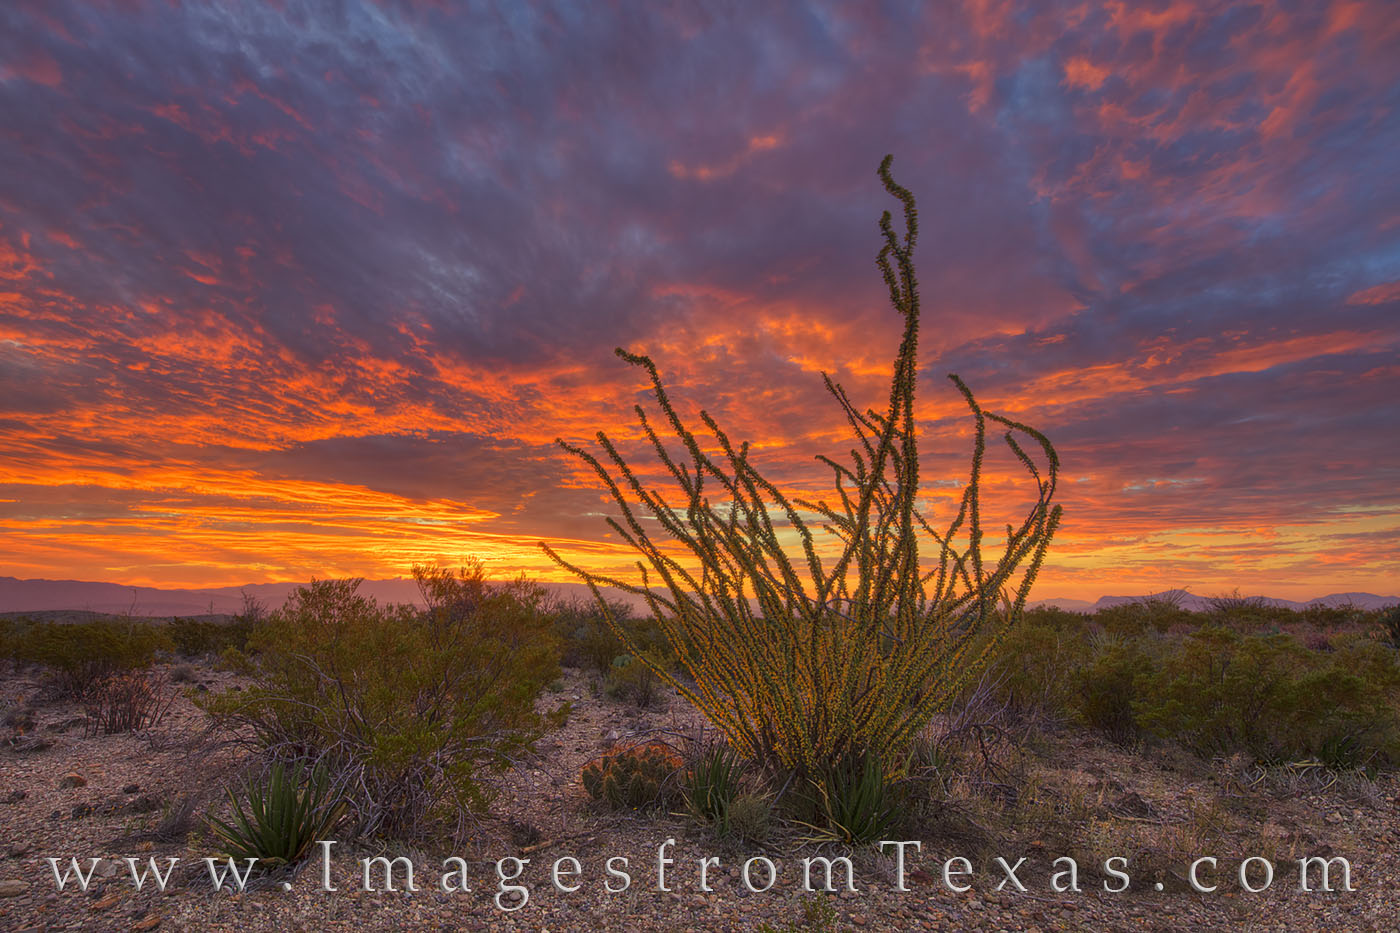 On a cool November morning in Big Bend National Park, the sky lights up in vivid oranges and blues. In the foreground, an Autumn...